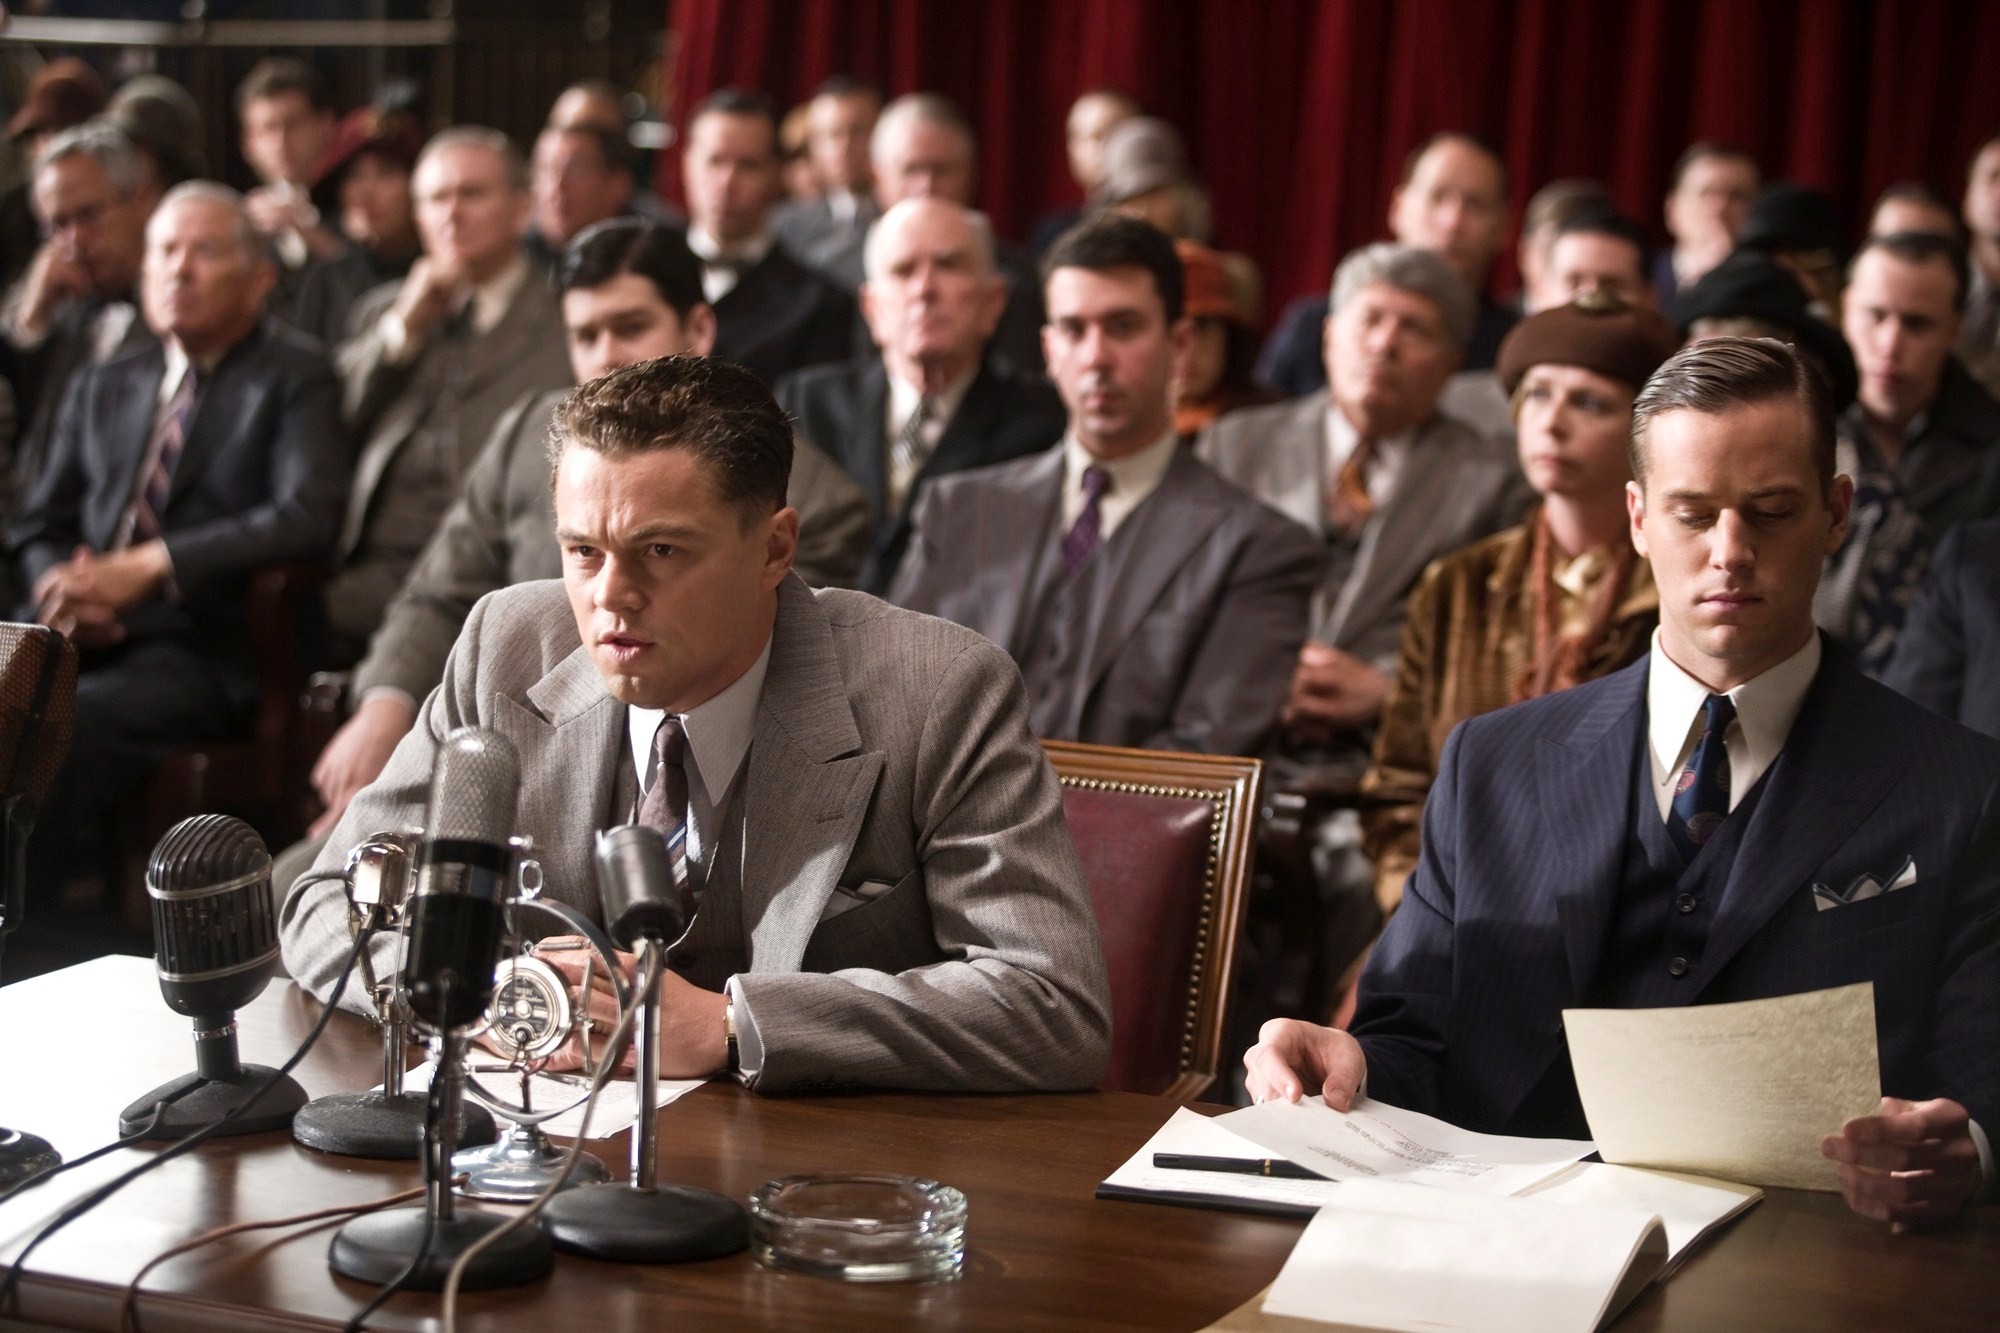 Leonardo DiCaprio stars as J. Edgar Hoover and Armie Hammer stars as Clyde Tolson in Warner Bros. Pictures' J. Edgar (2011). Photo credit by Keith Bernstein.